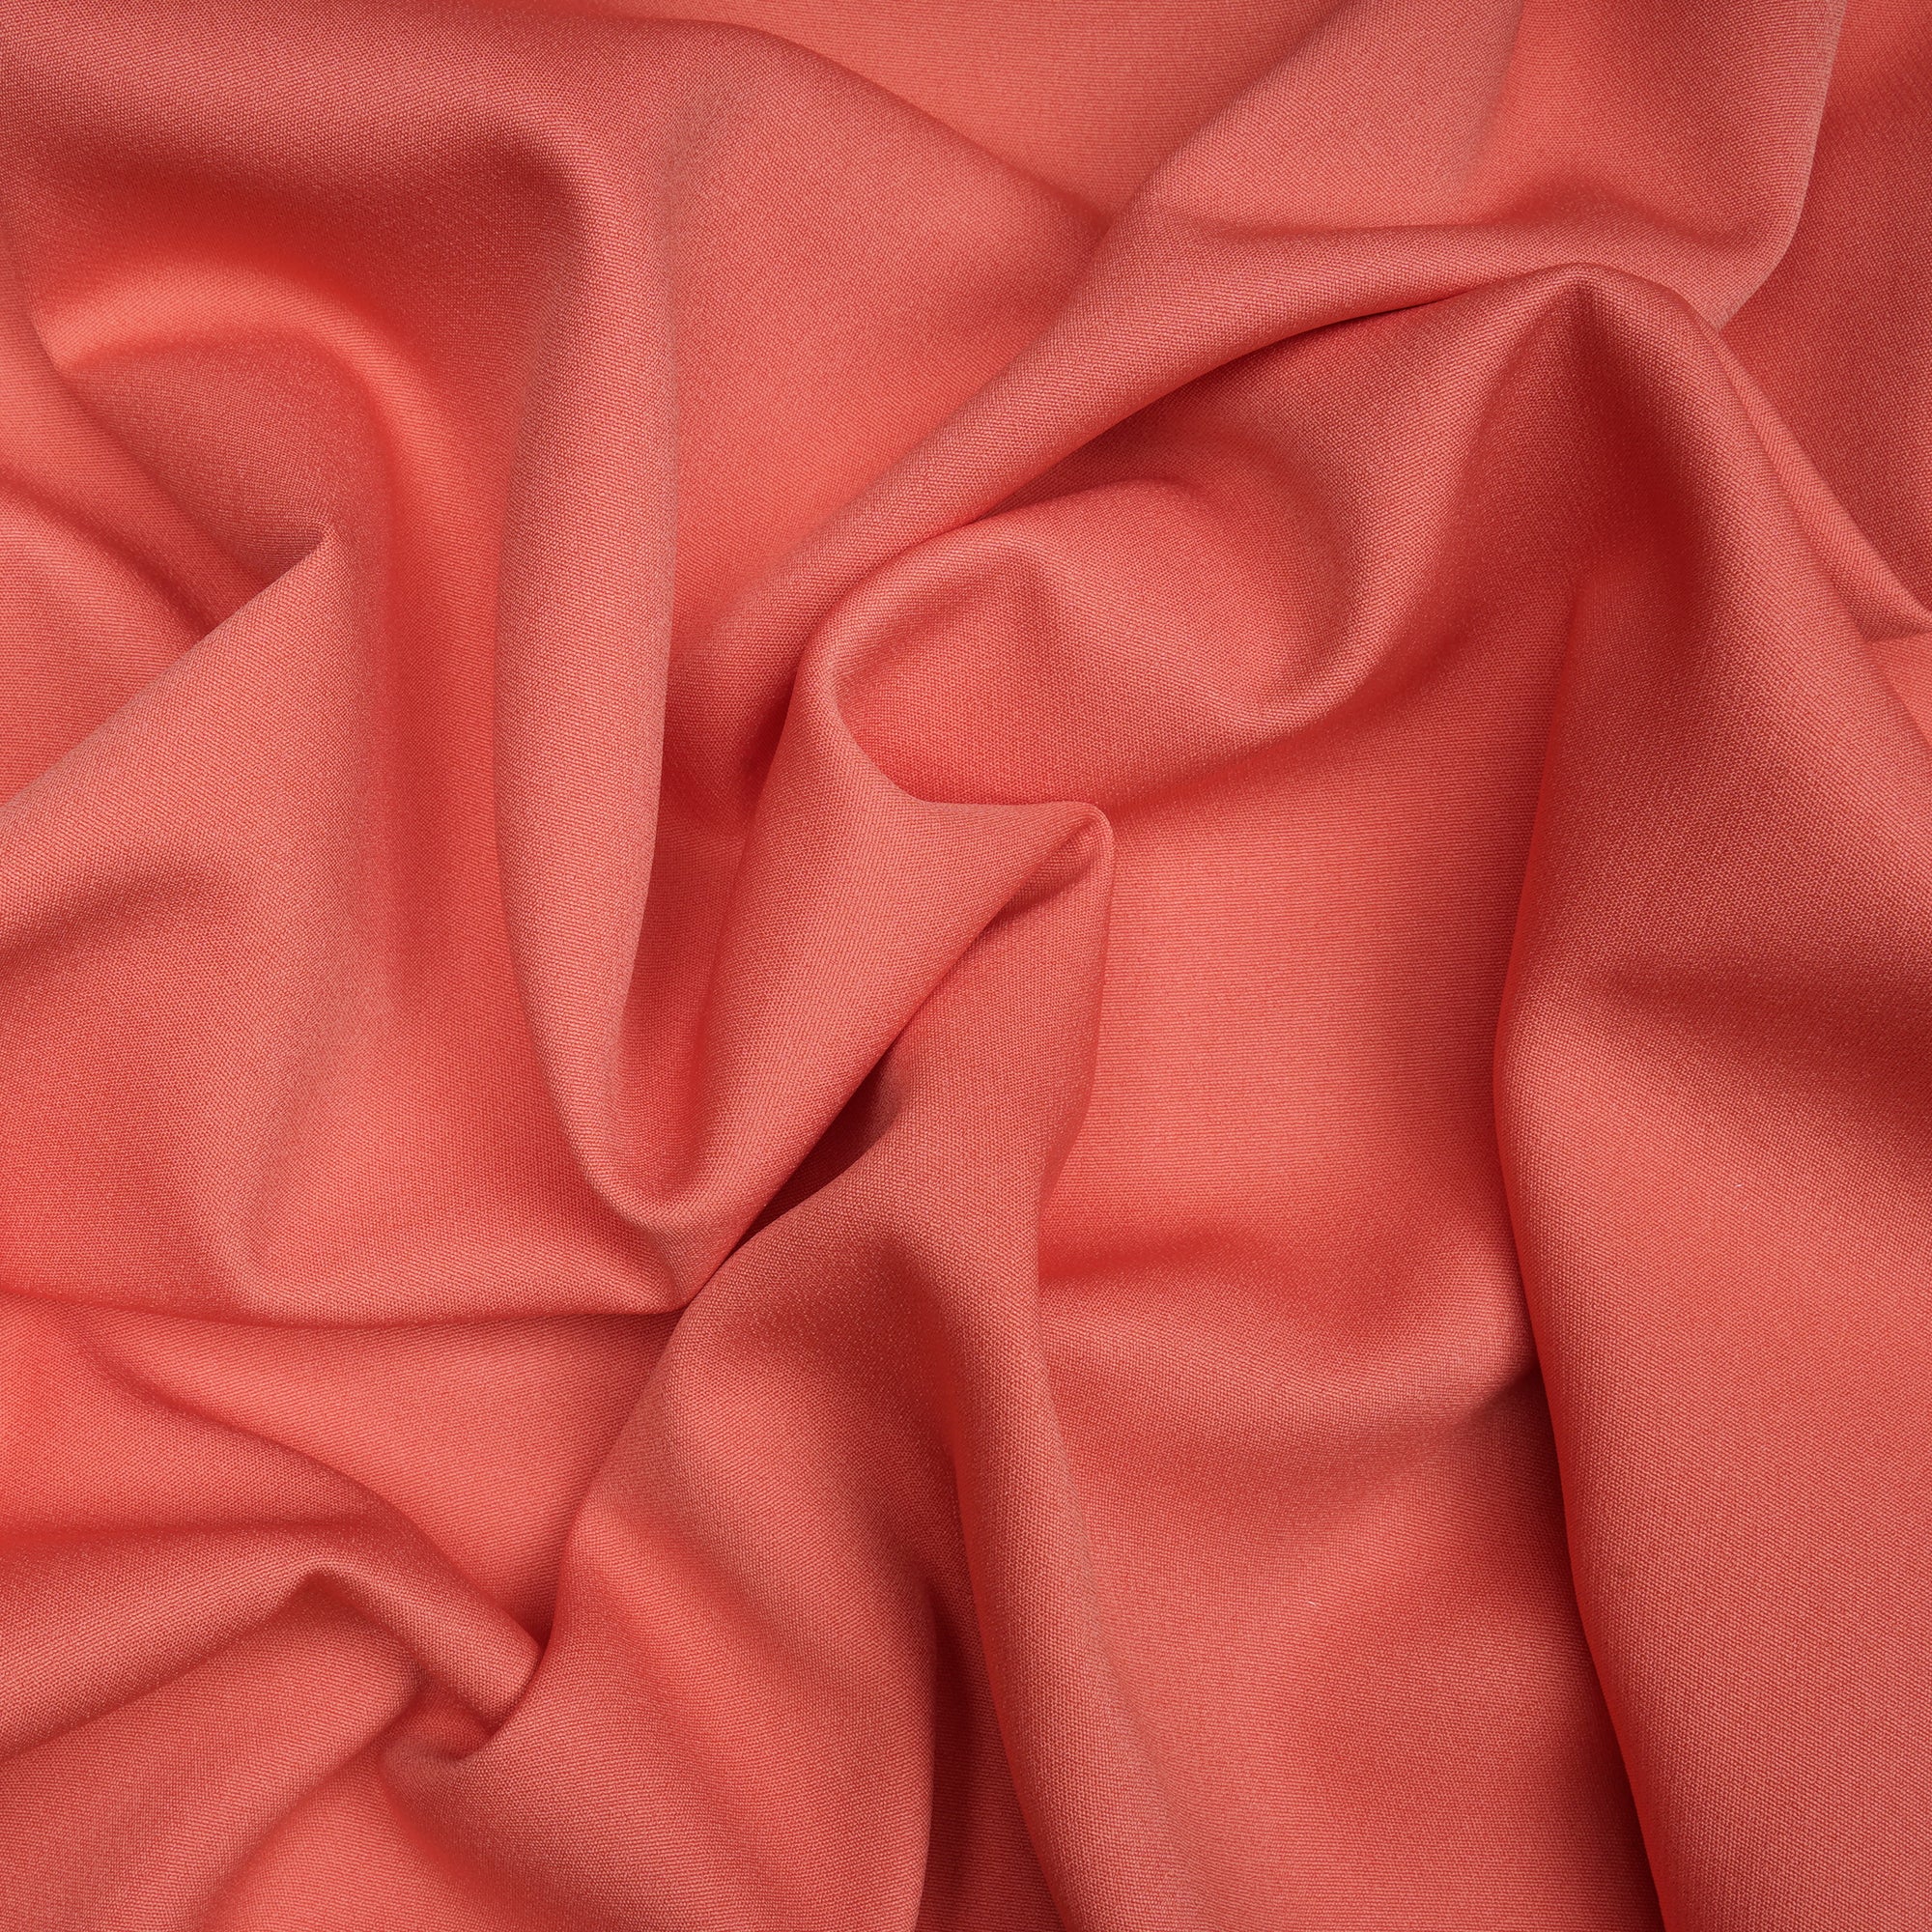 Coral Quartz Solid Dyed Imported Banana Crepe Fabric (60" Width)